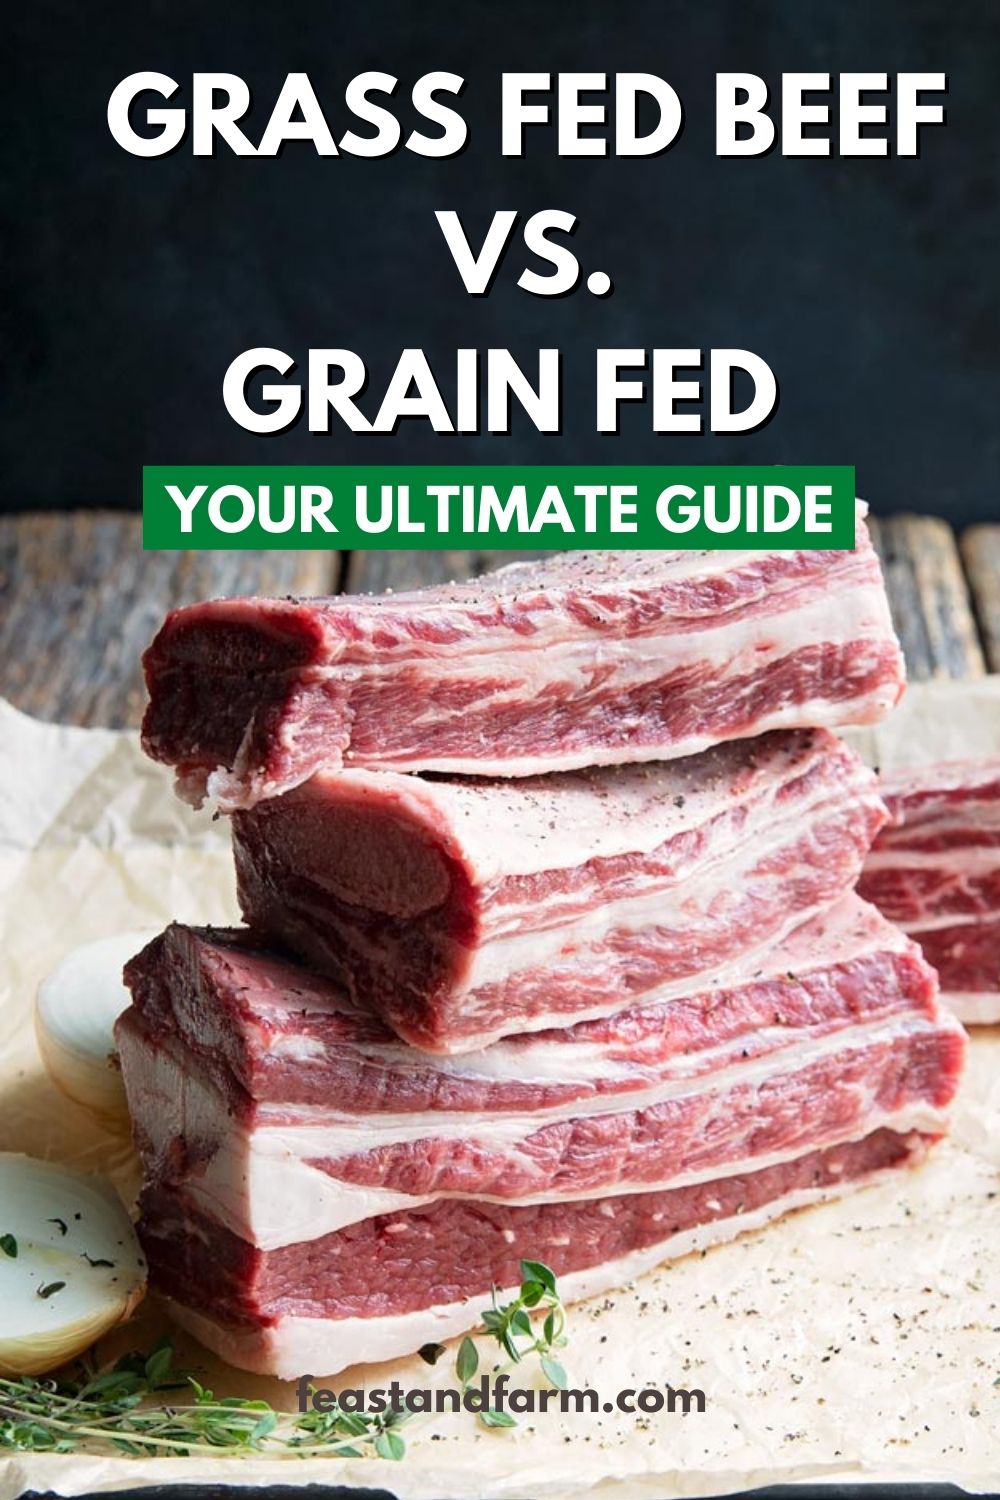 Grass fed beef vs grain fed: Your unbiased guide - Feast and Farm